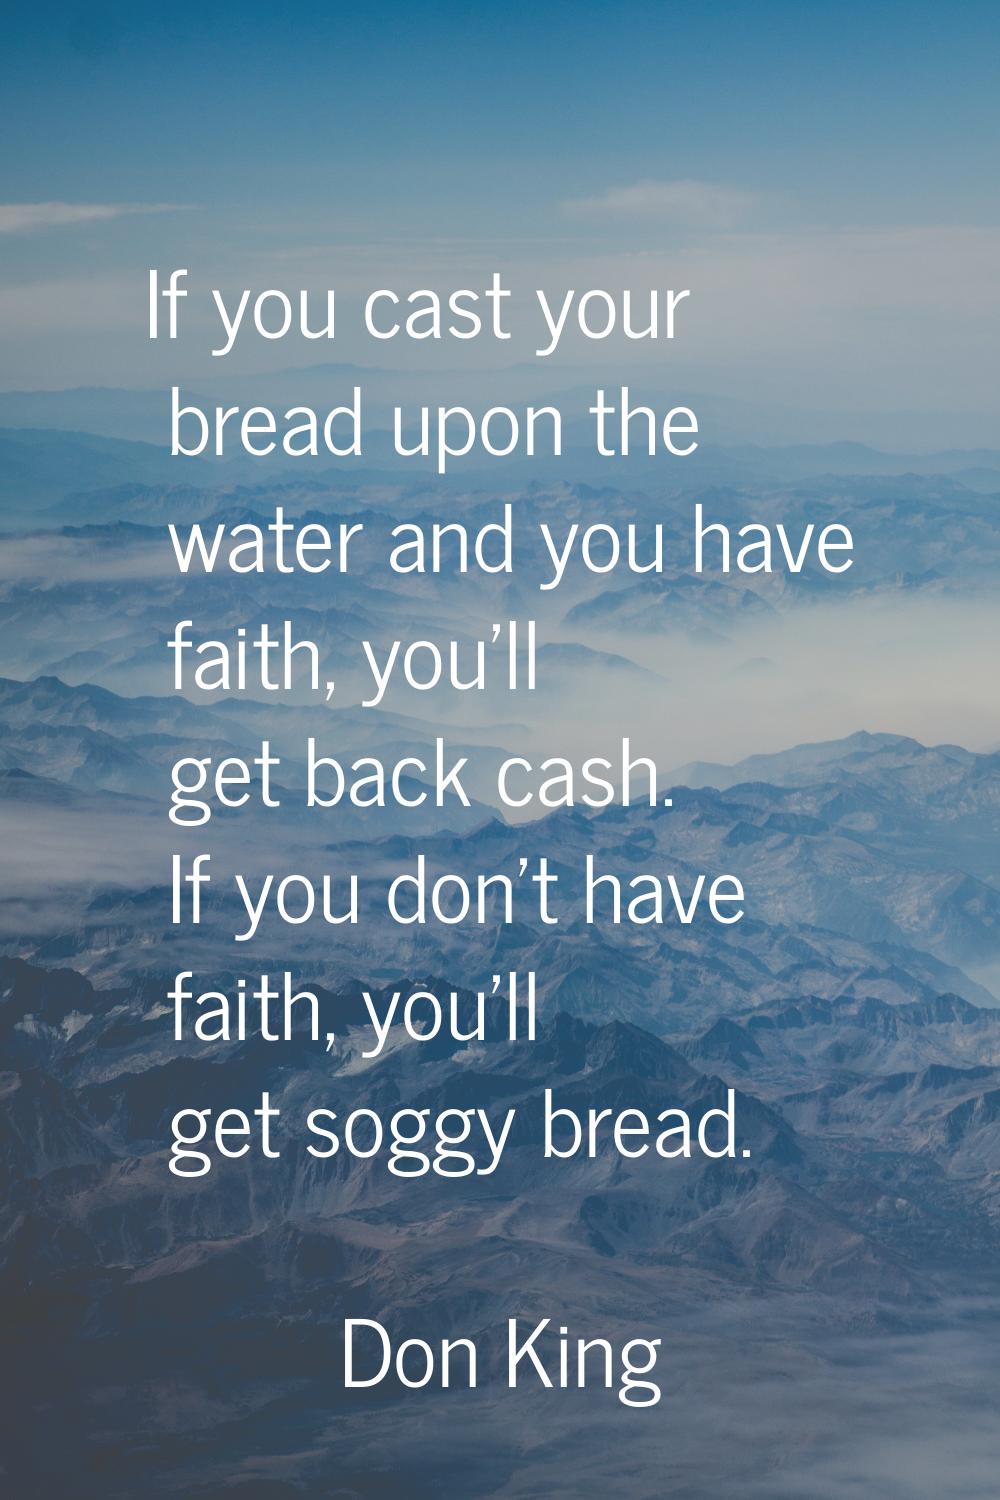 If you cast your bread upon the water and you have faith, you'll get back cash. If you don't have f